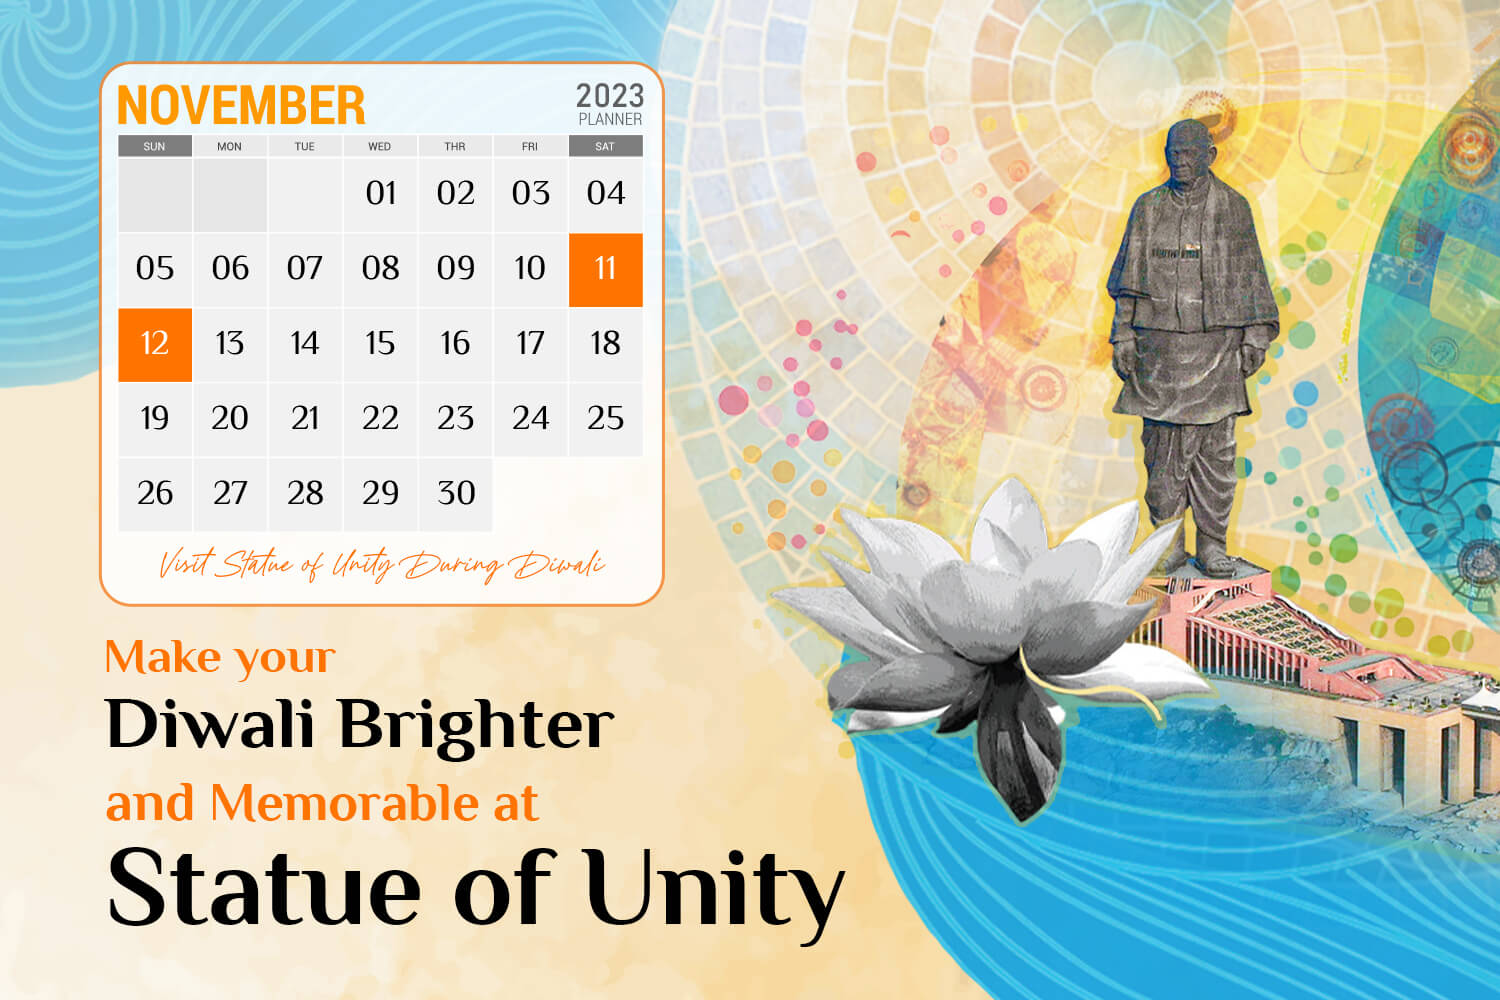 Diwali Celebration at Statue of Unity: Unity, Lights, and Festivities